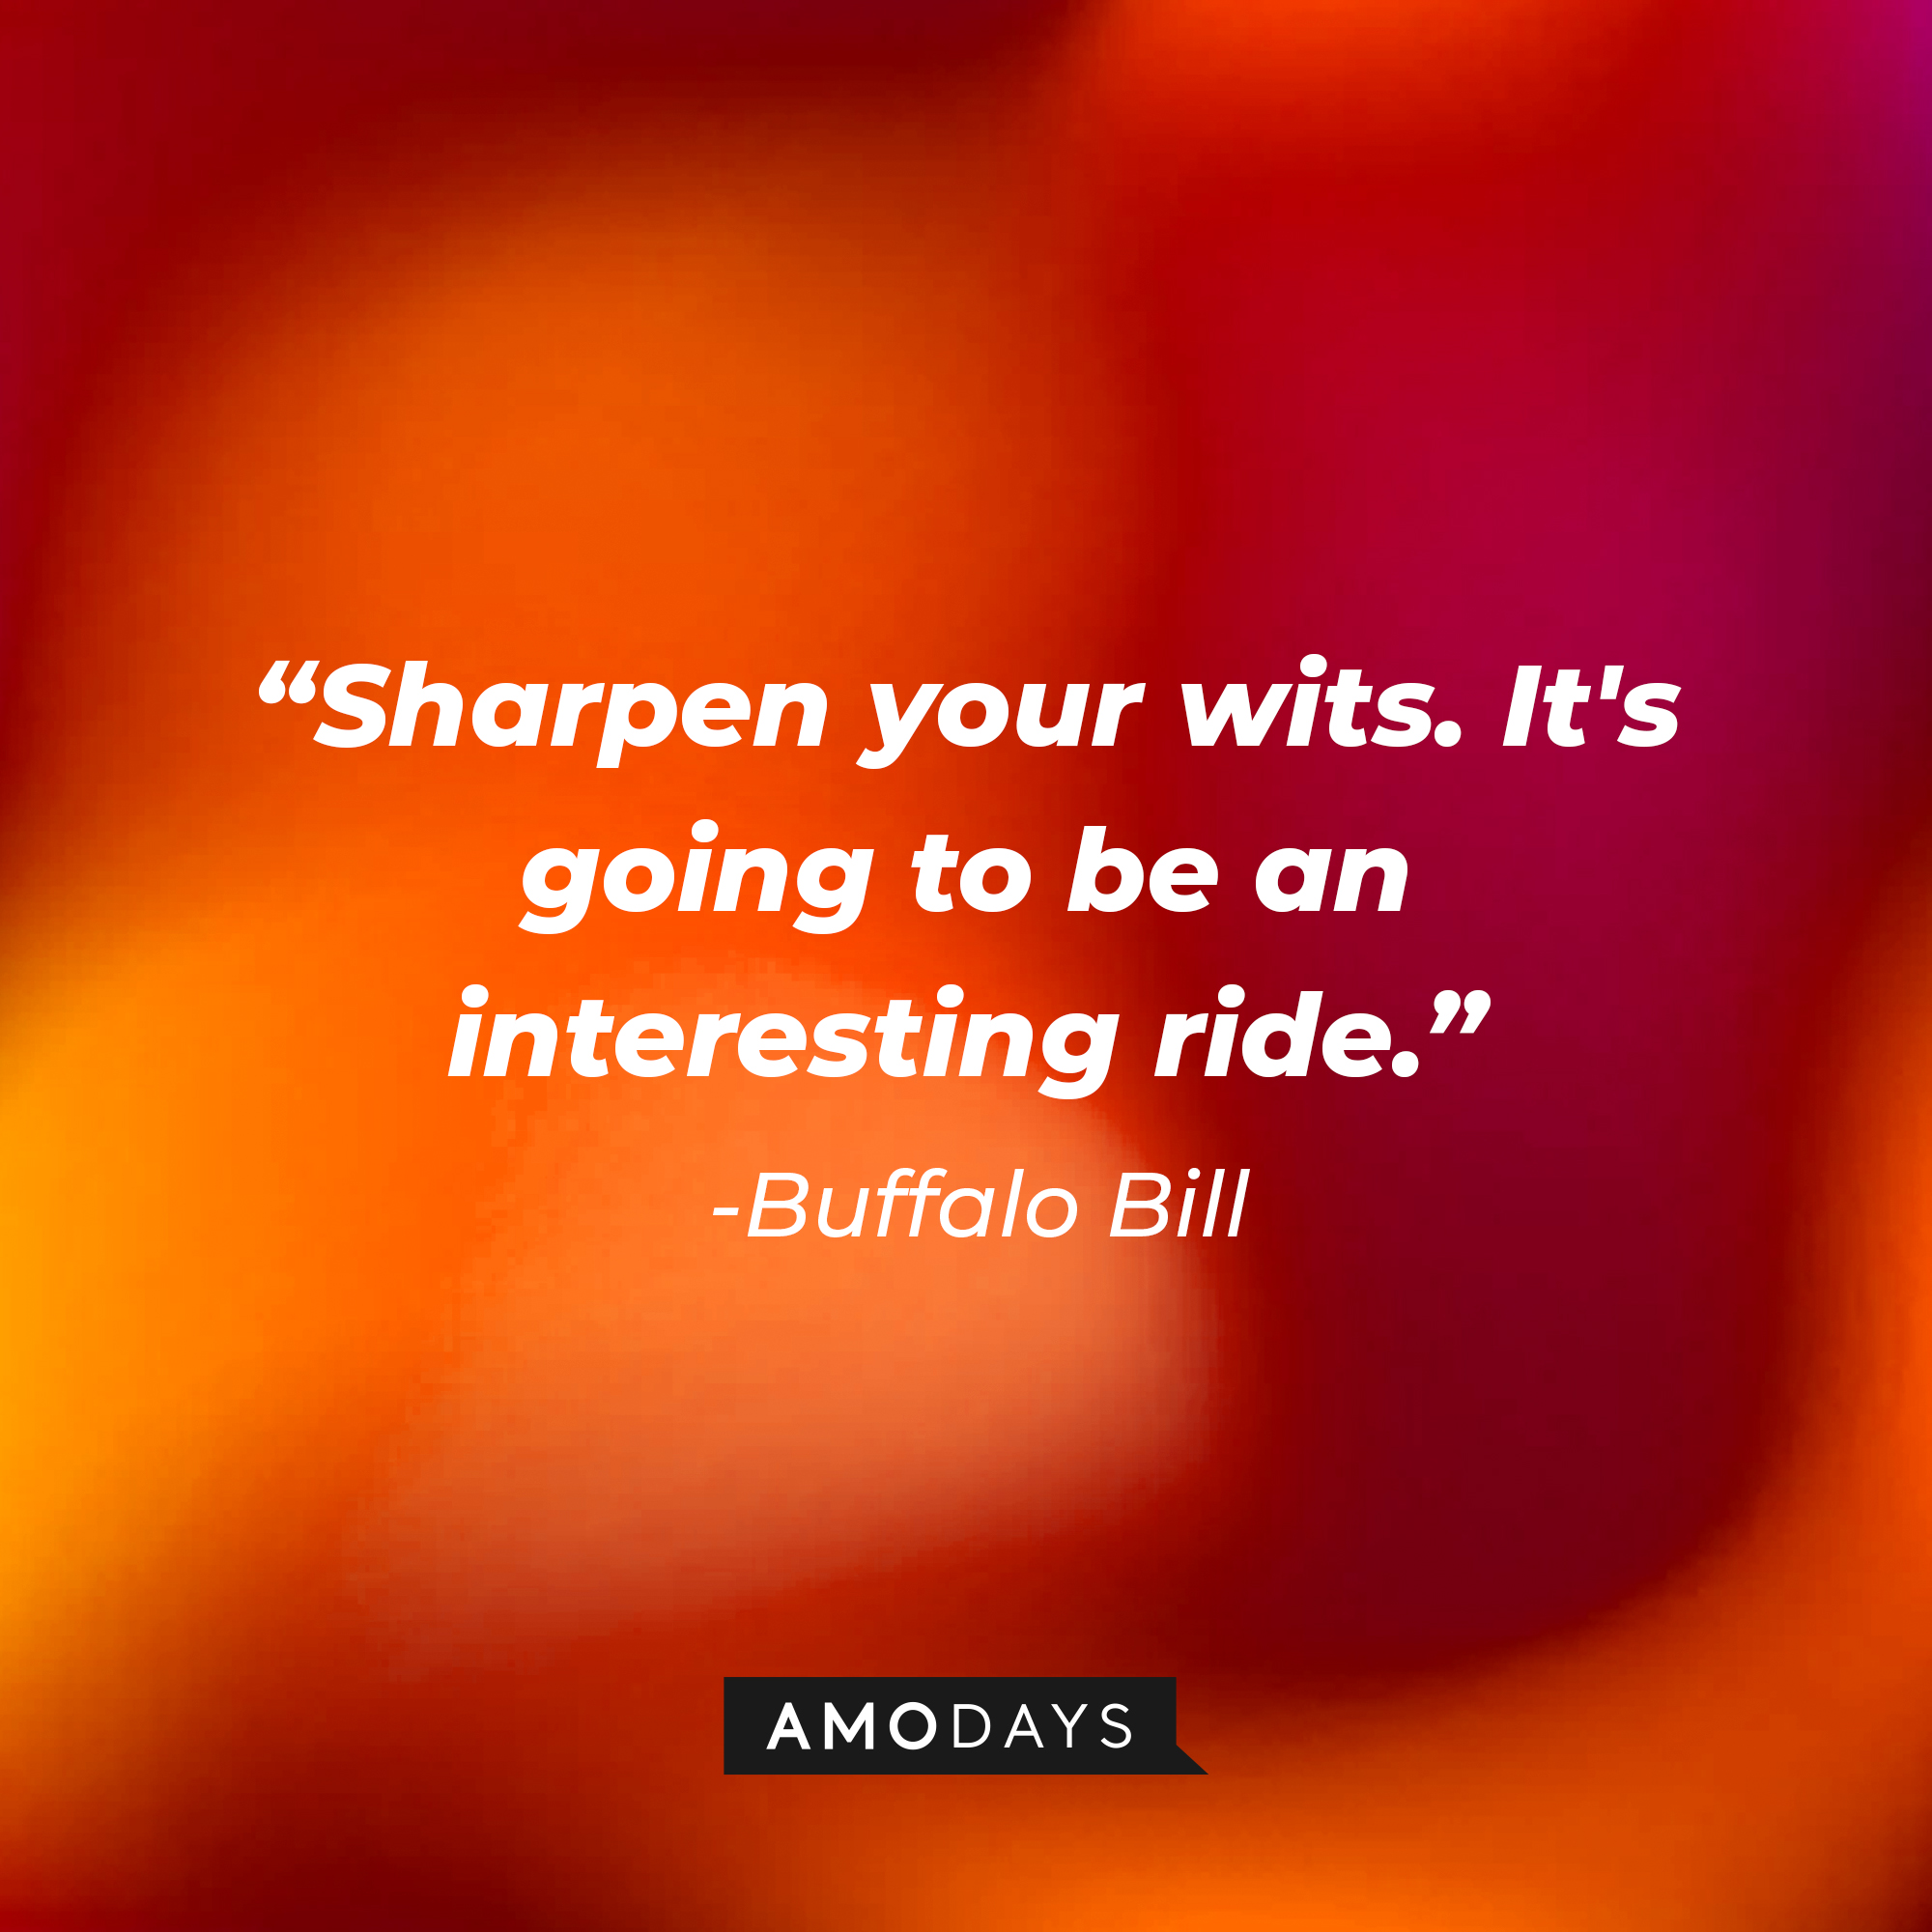 Buffalo Bill's quote from "The Silence of the Lambs:" "Sharpen your wits It's going to be an interesting ride." | Source: AmoDays